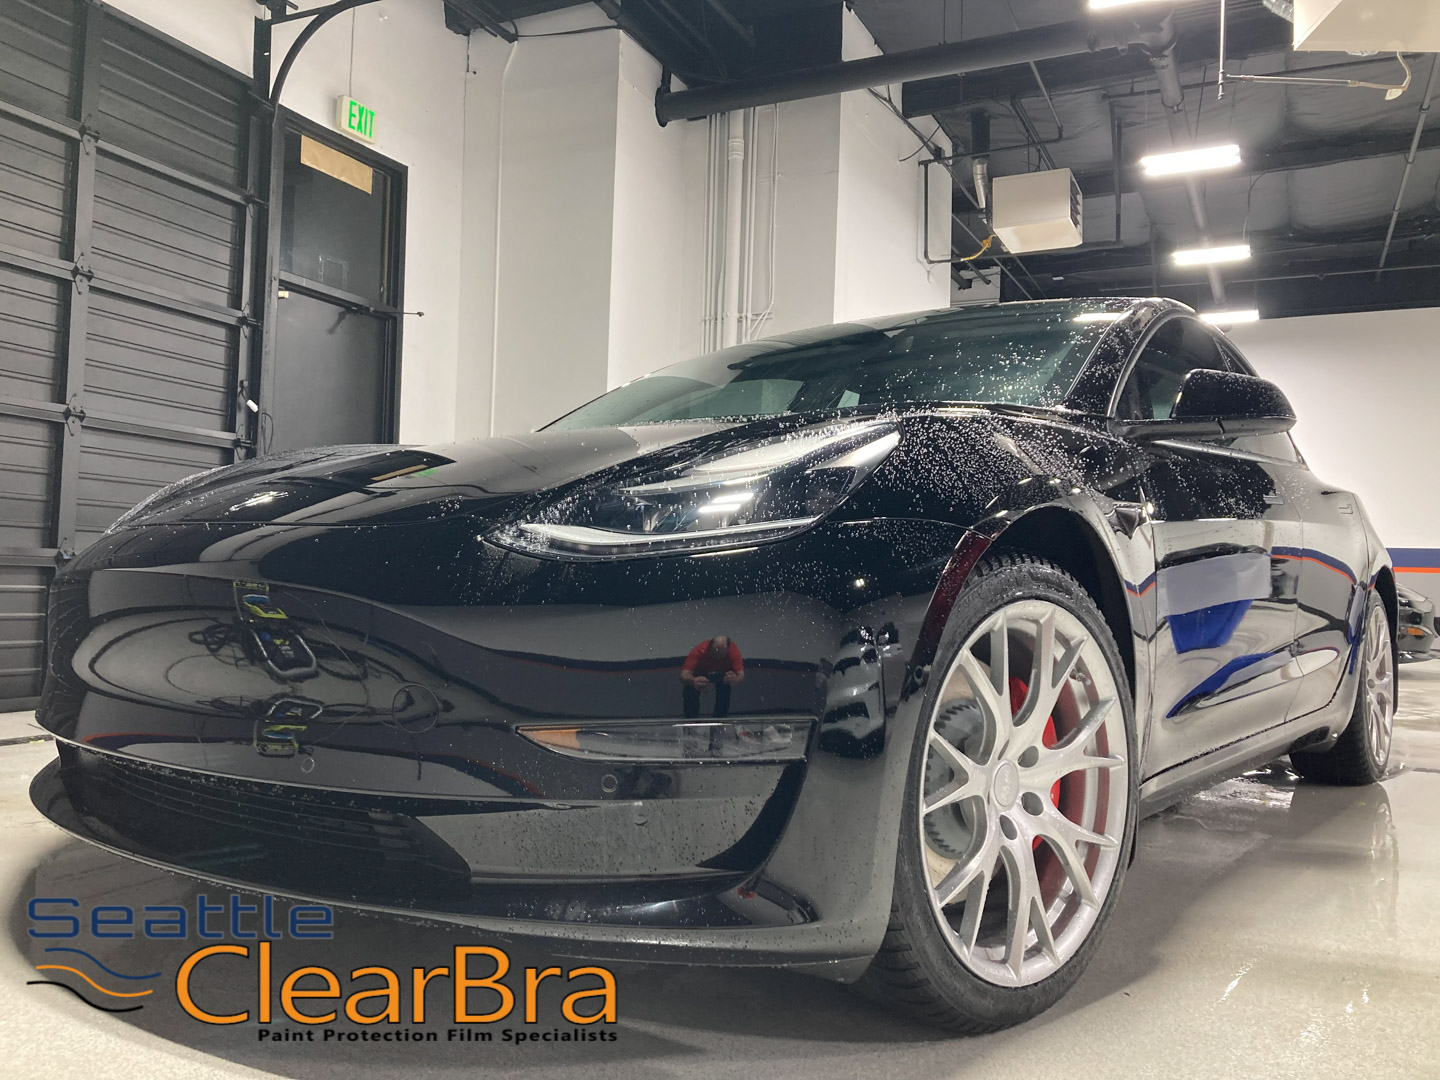 Tesla Xpel Redmond Clear Bra PPF Paint Protection - Seattle ClearBra